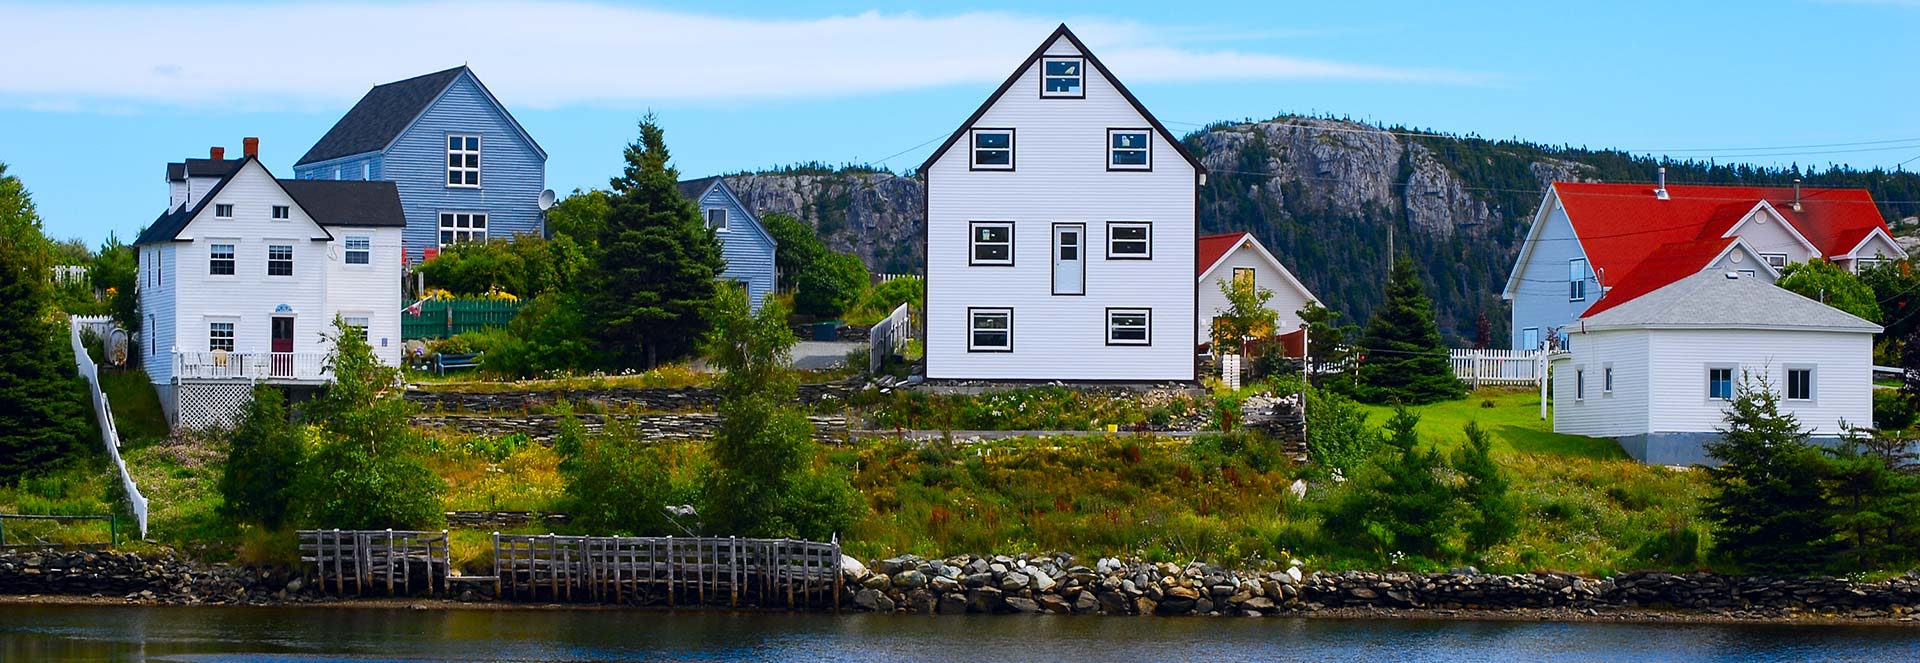 39 Pouch Cove Line, Bauline